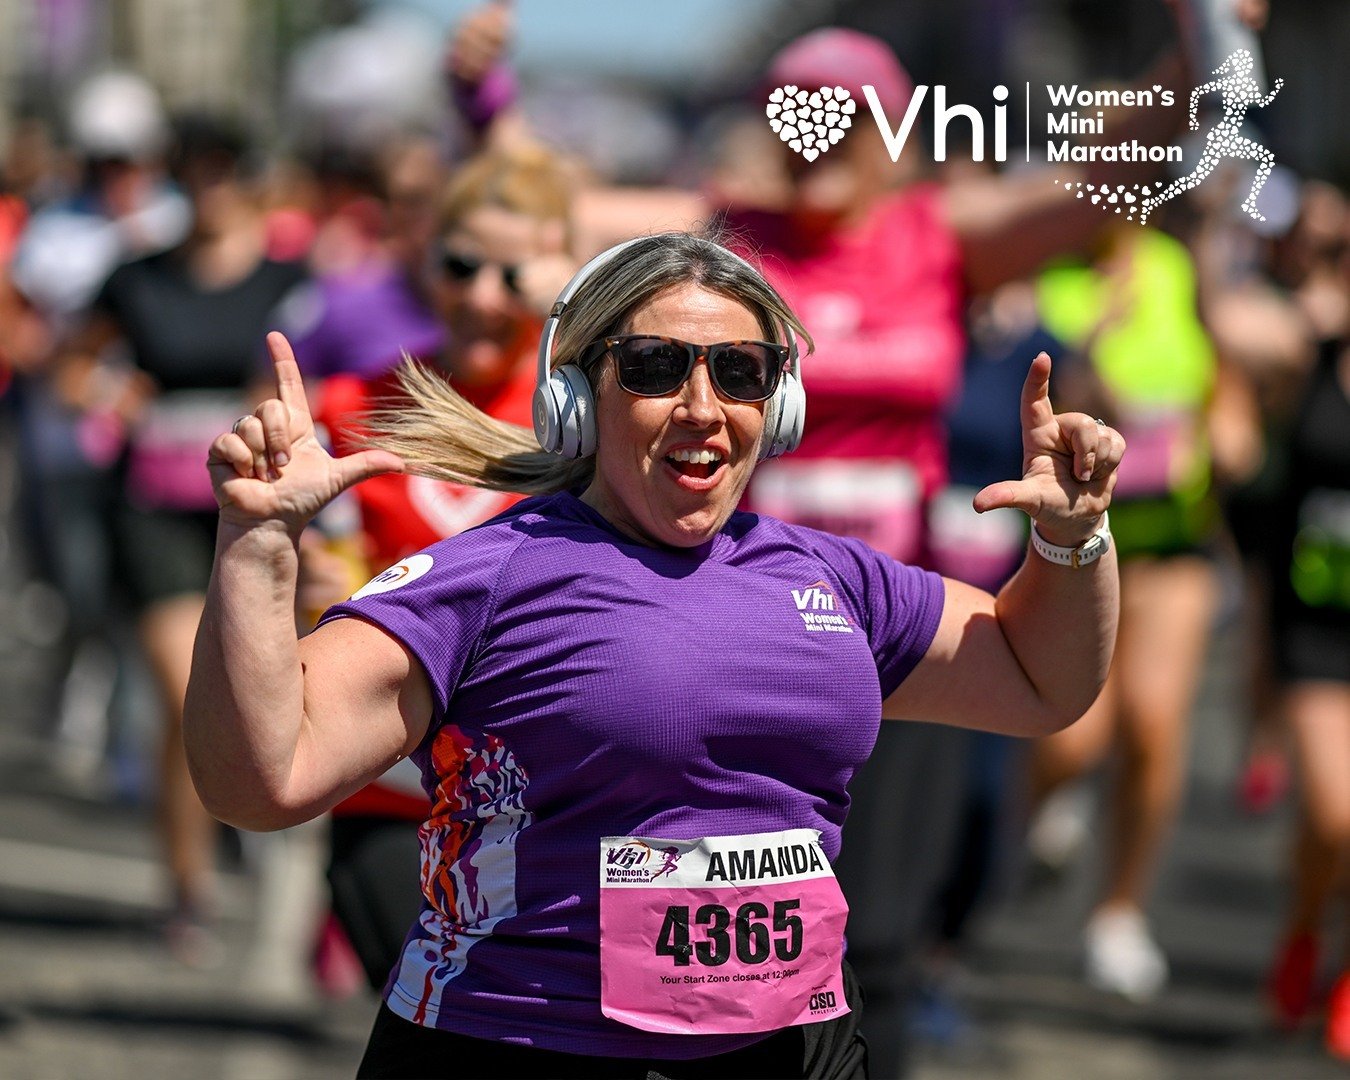 It's time to share the heart with your fellow participants! ❤️
Tell us your go-to running song or songs in the comments for when you need that extra motivational push! 🎶 

Don't forget to check out the Vhi WMM playlist on the @98fmdublin app ❤️ 

#H